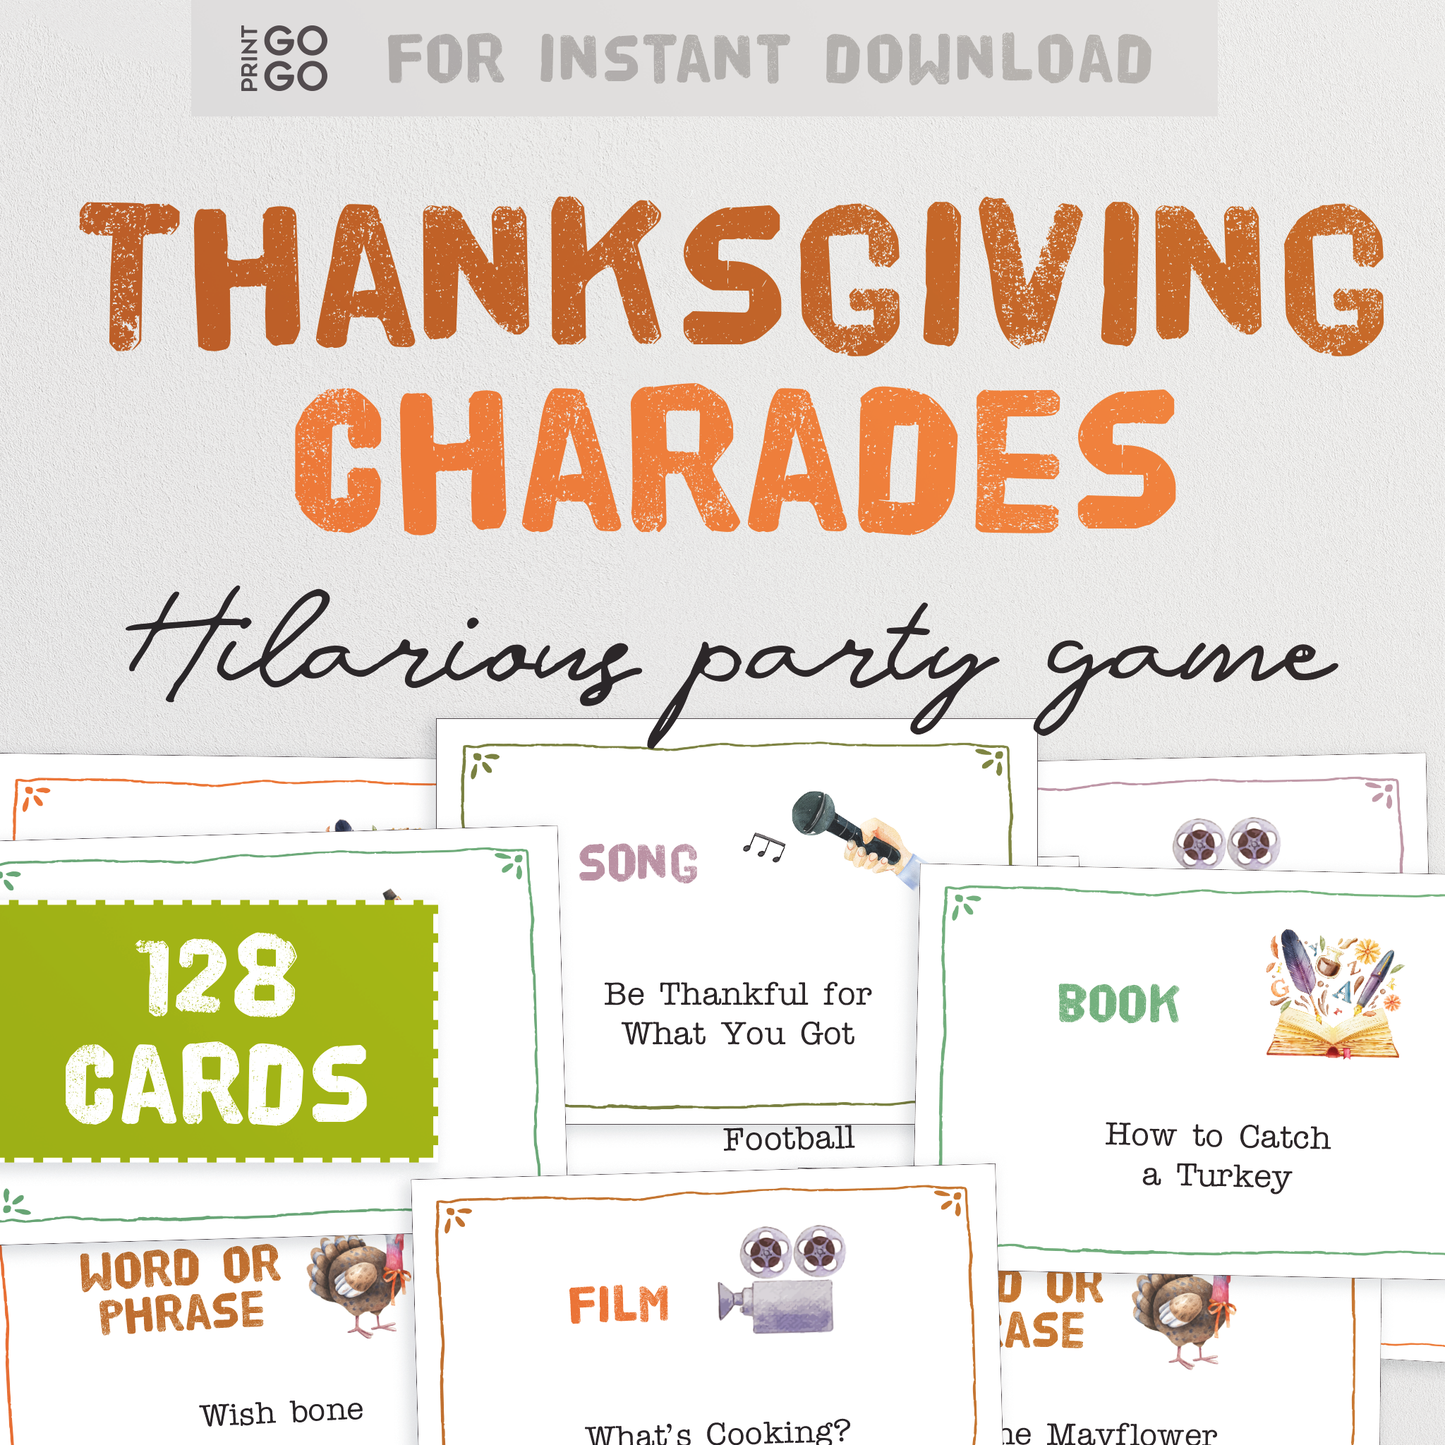 Thanksgiving Game Bundle - Fun Team Party Games To Play With The Whole Family